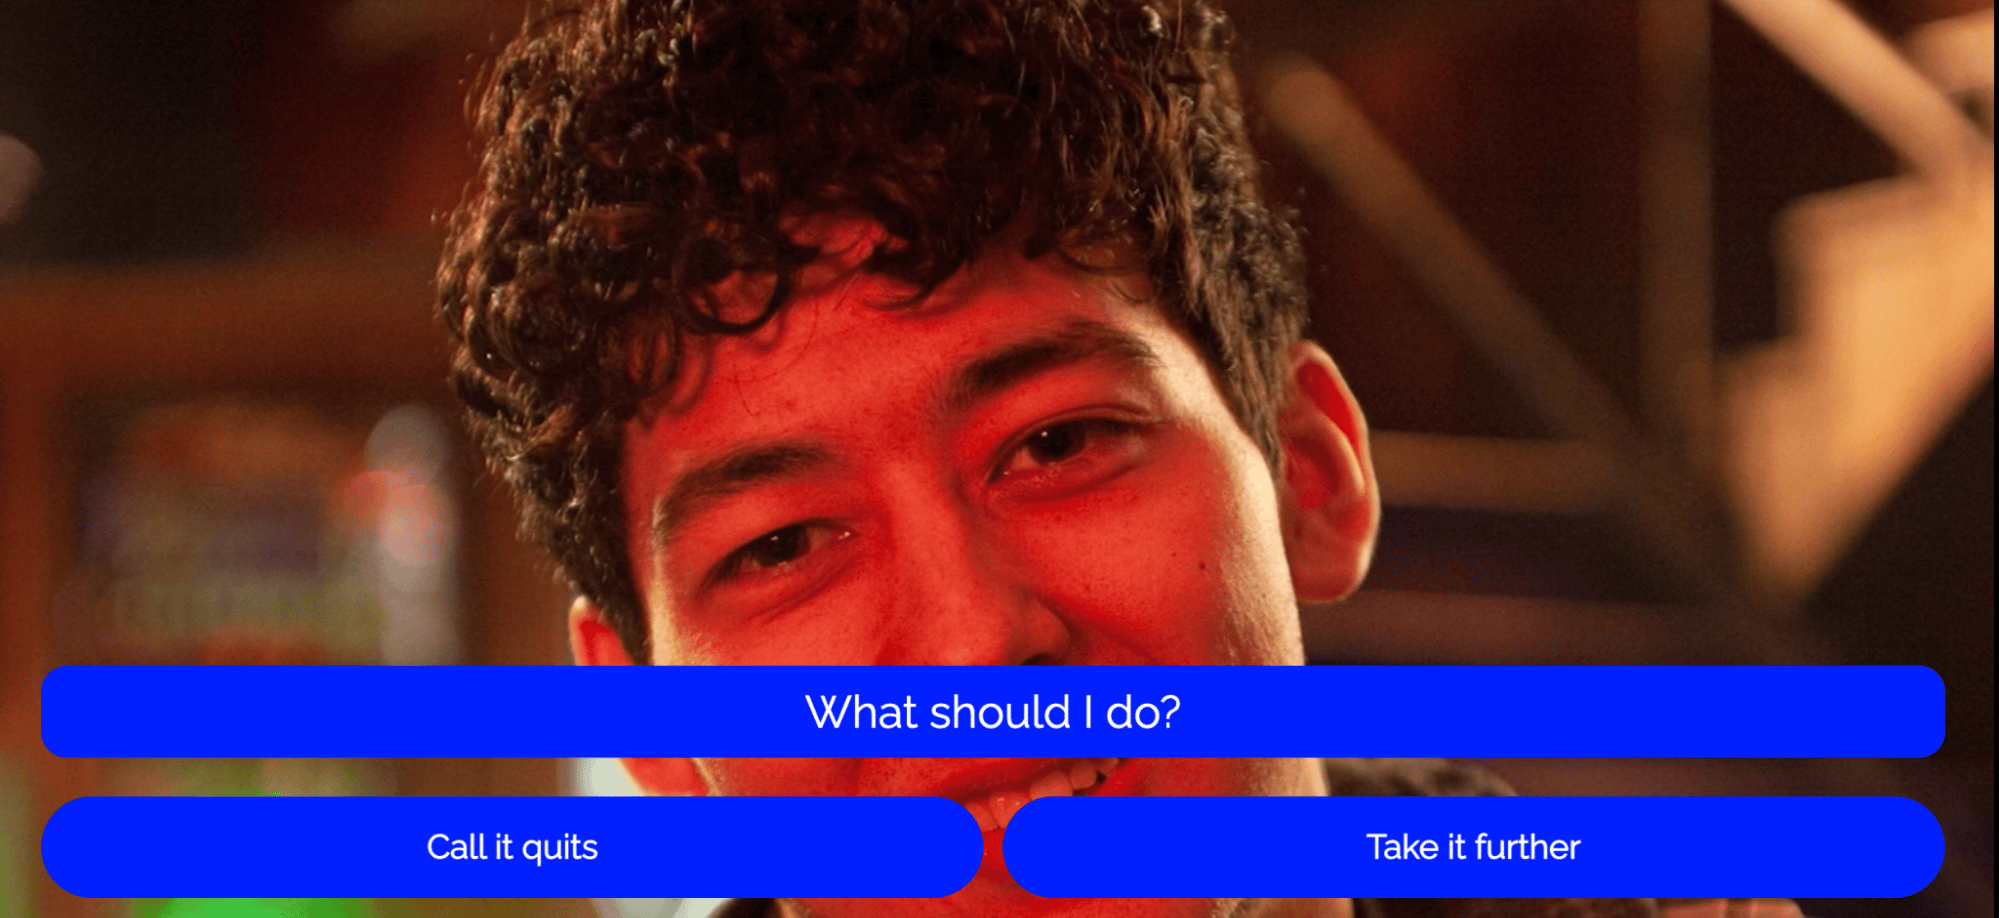 Screenshot from DatingForward project - a behaviour changing interactive video. A man looks at the camera. A question is placed over his face: "what should i do?" Two options are given: "call it quits" "take it further"